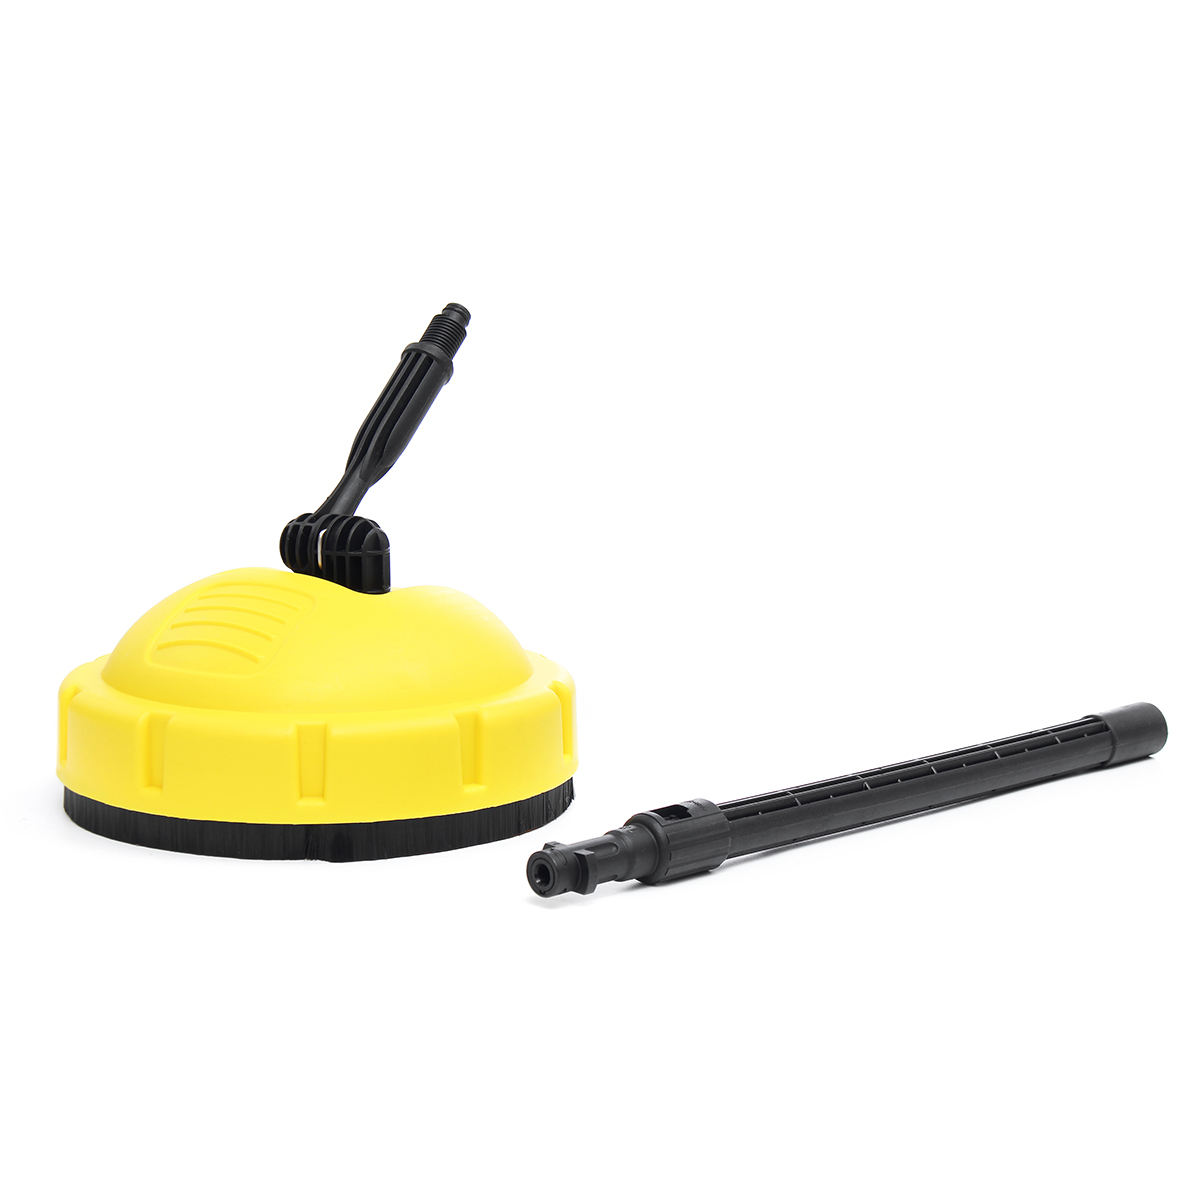 Pressure-Washer-Rotary-Surface-Patio-Cleaner-Floor-Brushing-Washing-Tool-For-Karcher-LAVOR-1330987-3